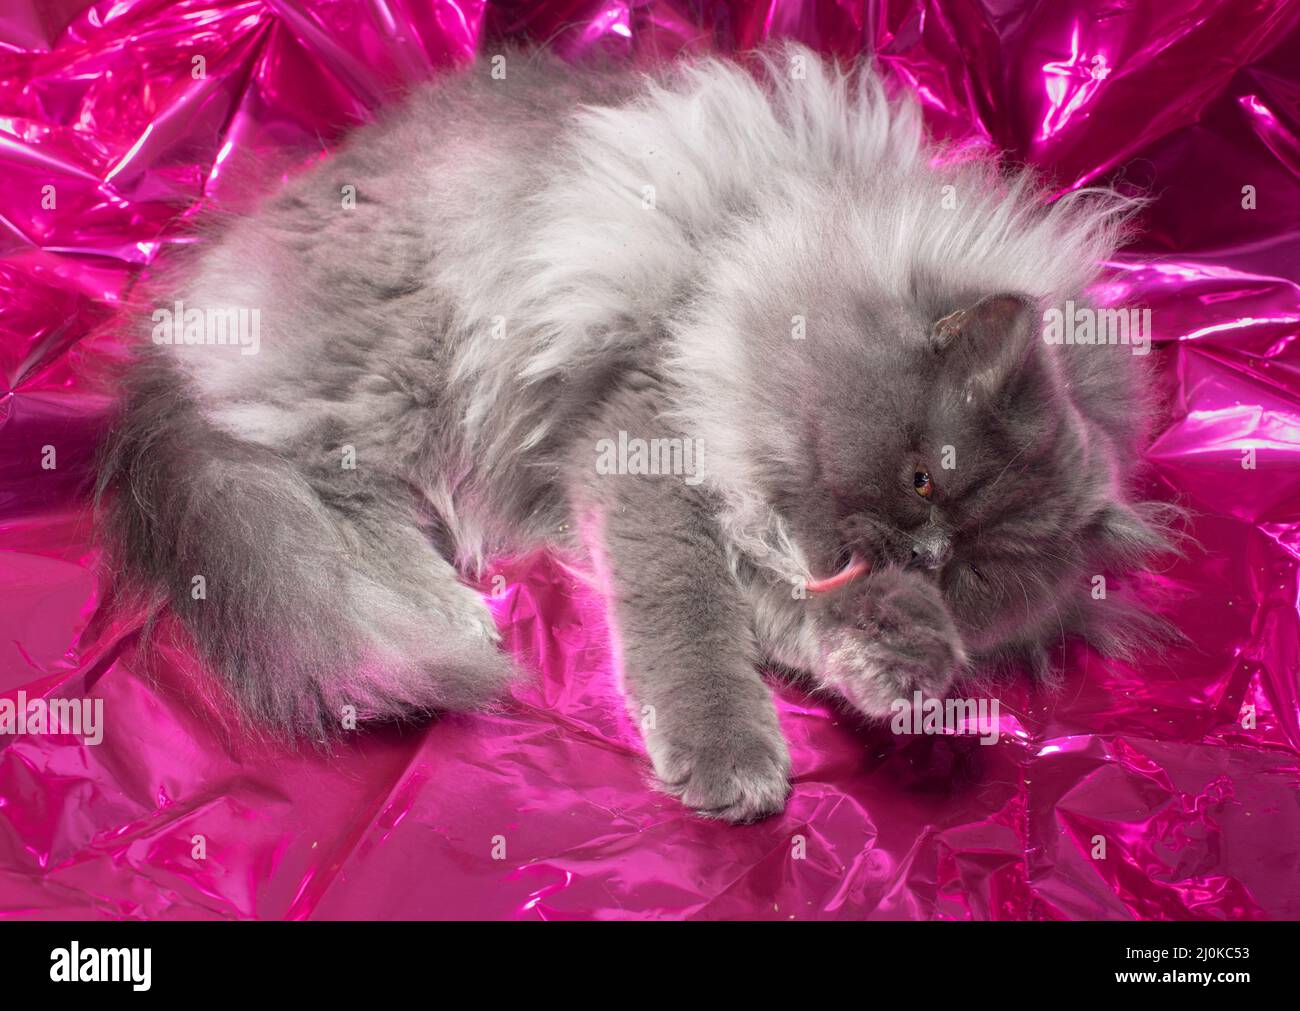 Cute fluffy long haired grey cat laying on shiny pink mylar licking his paw. Stock Photo